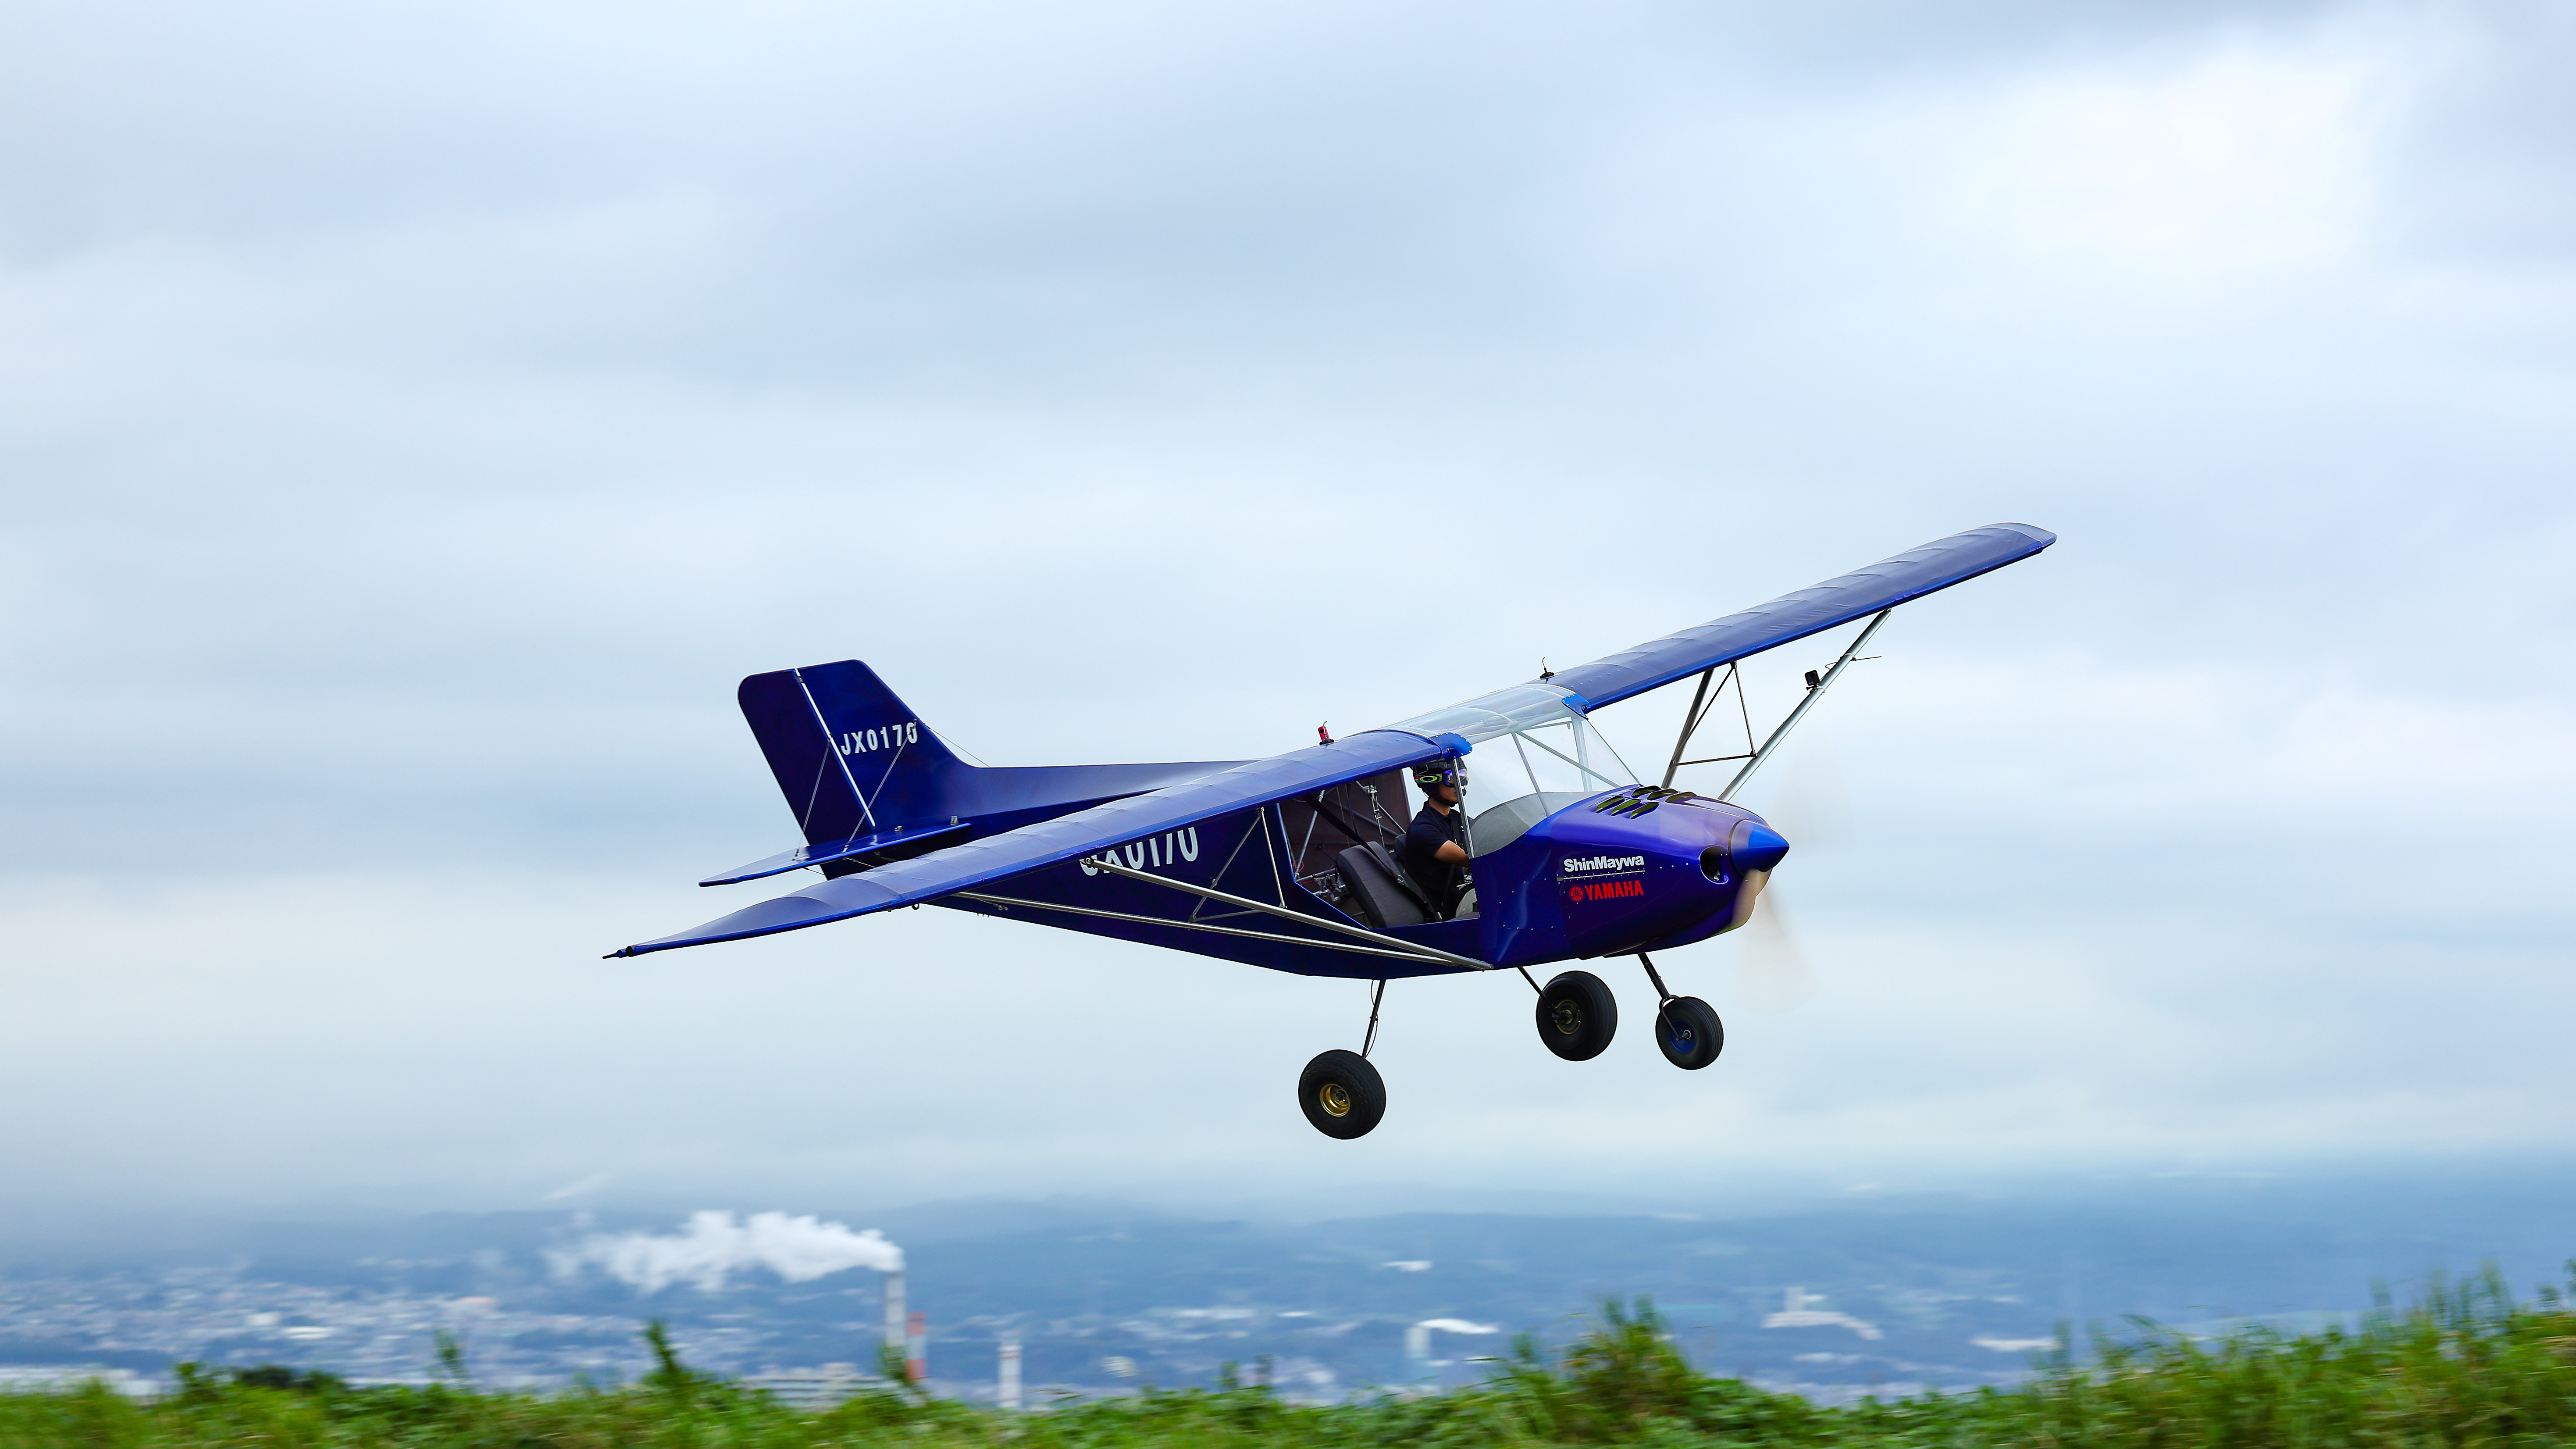 Diligence dart besøgende Yamaha Motor and ShinMaywa Conduct Early-Stage Test Flight of Small  Aircraft | Business Wire